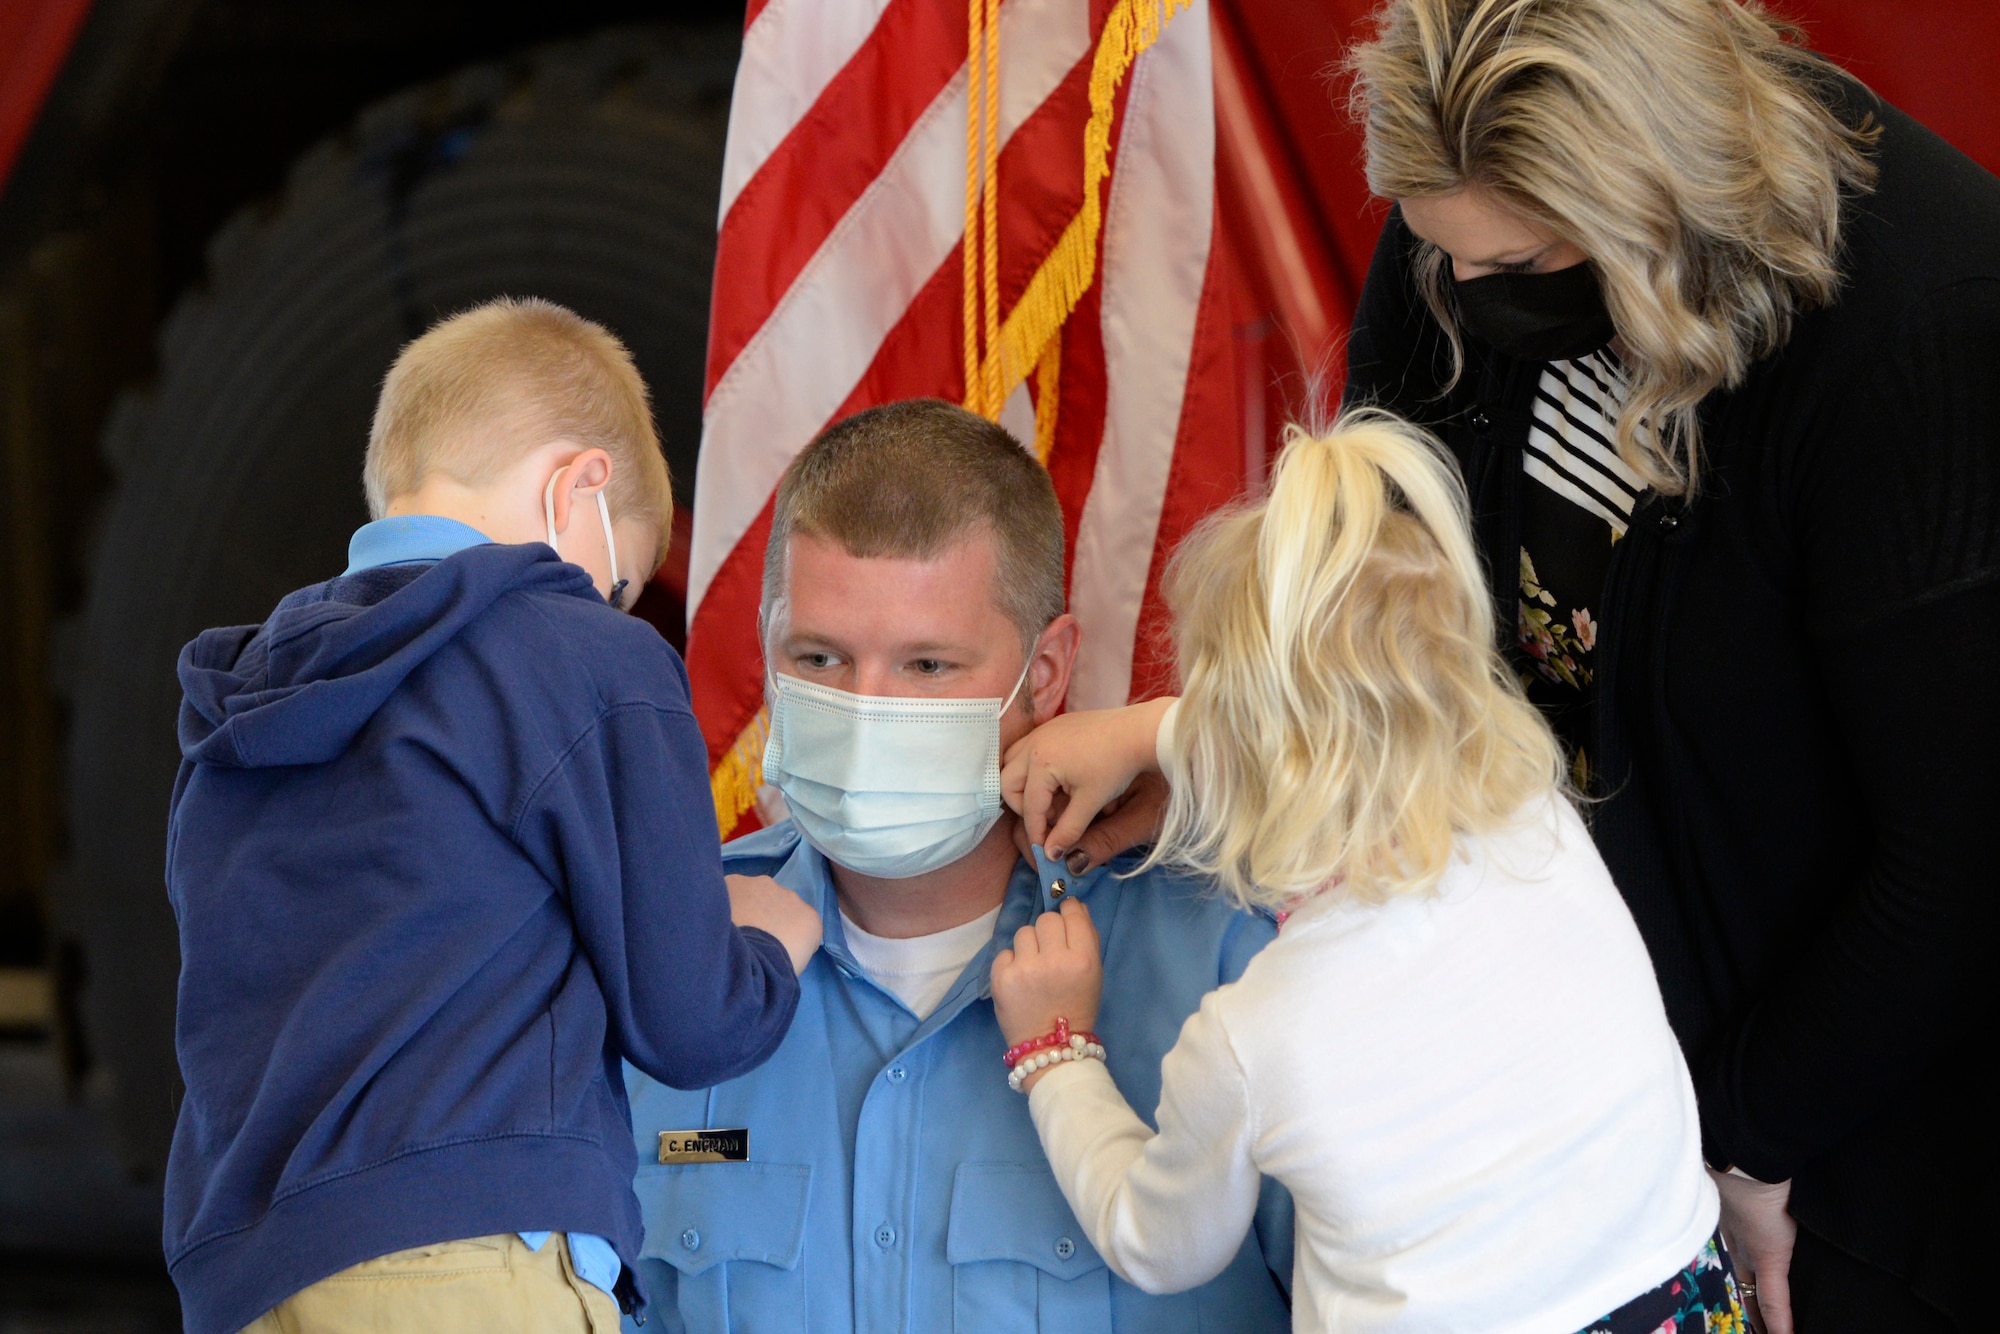 Air Force firefighter Lt. Chad Engman with the 788th Civil Engineer Squadron, is pinned on by his children, Cameron and Lexi, and wife Leah during a promotion ceremony at Wright-Patterson Air Force Base, Ohio on Monday, March 29, 2021.